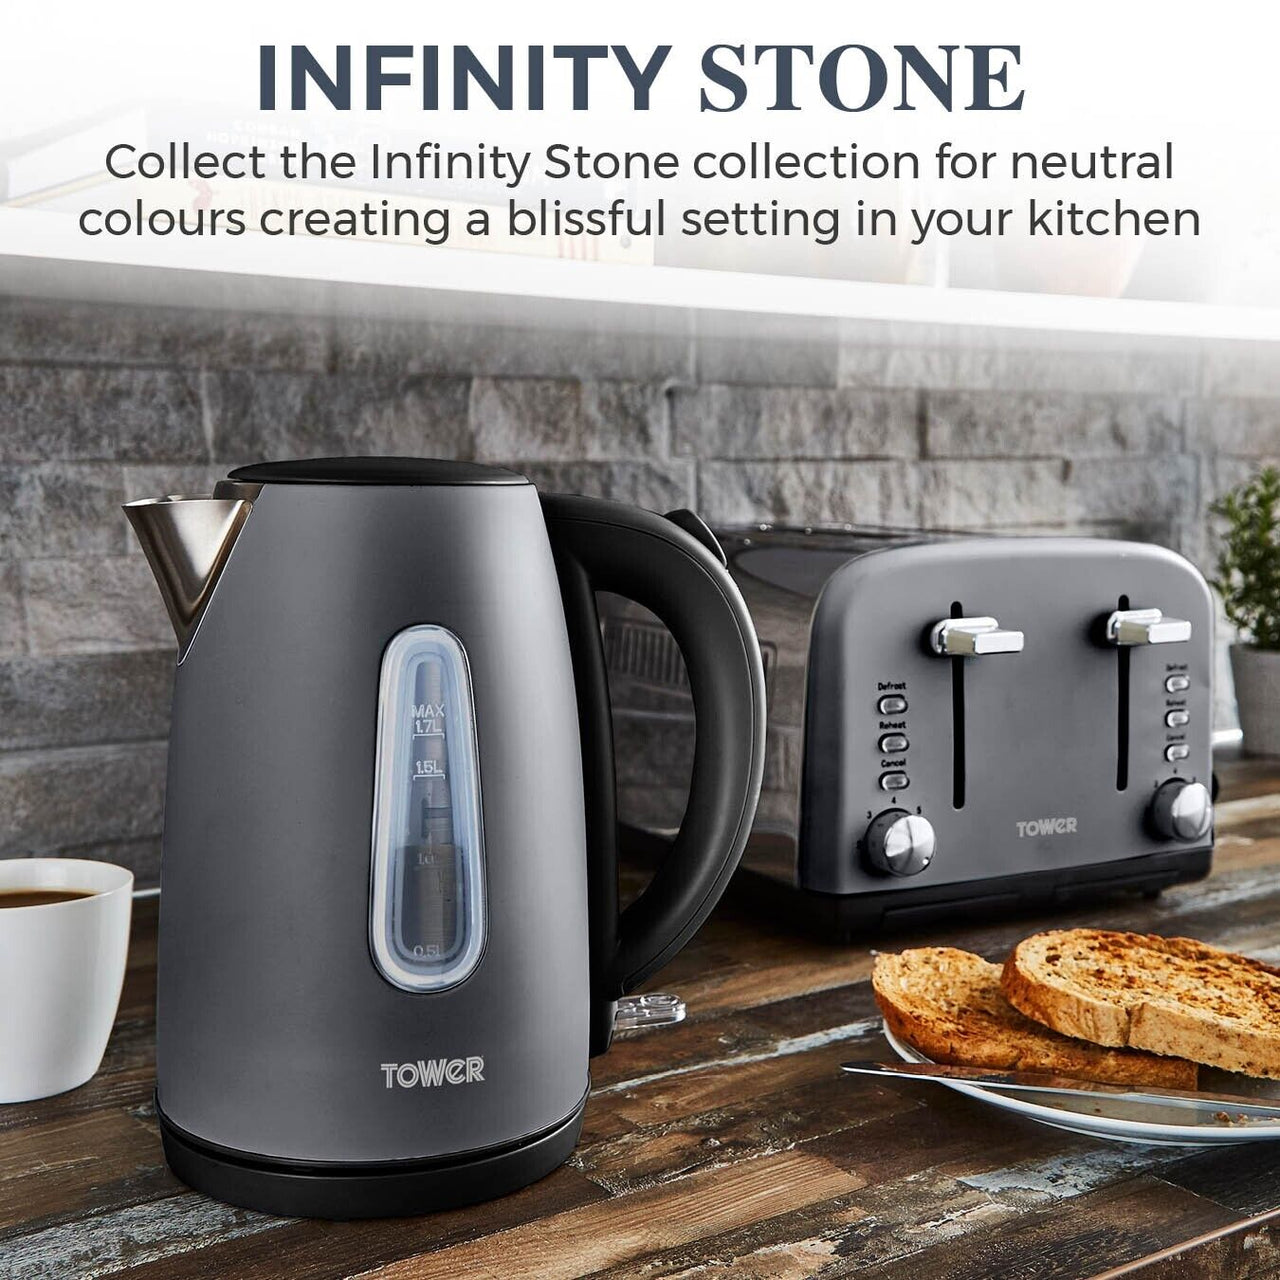 Tower Infinity 3KW 1.7L Jug Kettle & 4 Slice Toaster Matching Set in Slate Grey